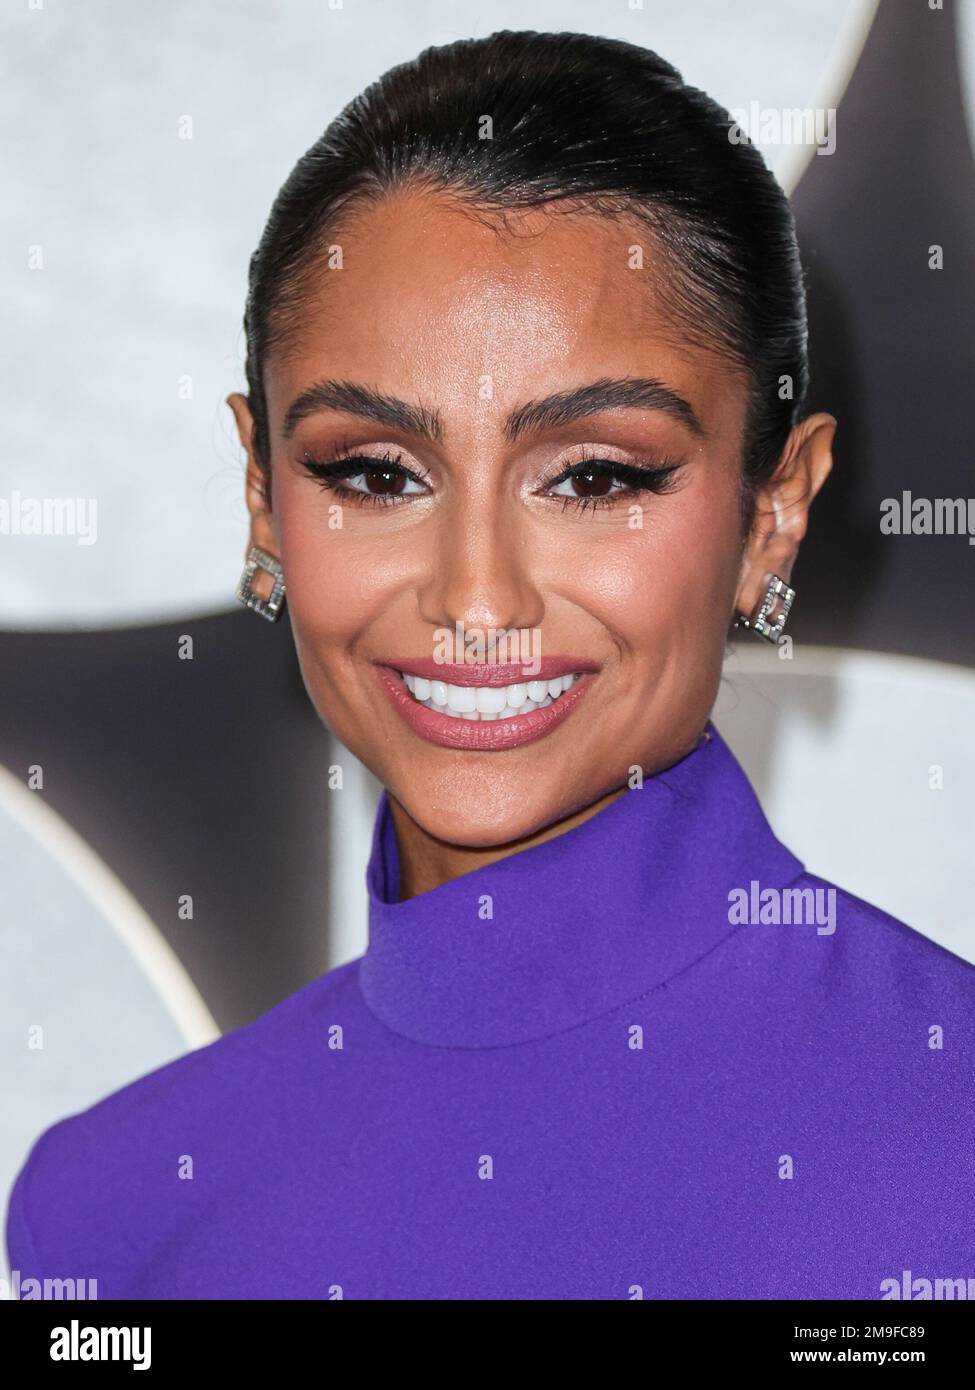 Westwood, United States. 17th Jan, 2023. WESTWOOD, LOS ANGELES, CALIFORNIA, USA - JANUARY 17: American actress, singer, model and life coach Nazanin Mandi arrives at the Los Angeles Premiere Of Netflix's 'You People' held at the Regency Village Theatre on January 17, 2023 in Westwood, Los Angeles, California, United States. (Photo by Xavier Collin/Image Press Agency) Credit: Image Press Agency/Alamy Live News Stock Photo